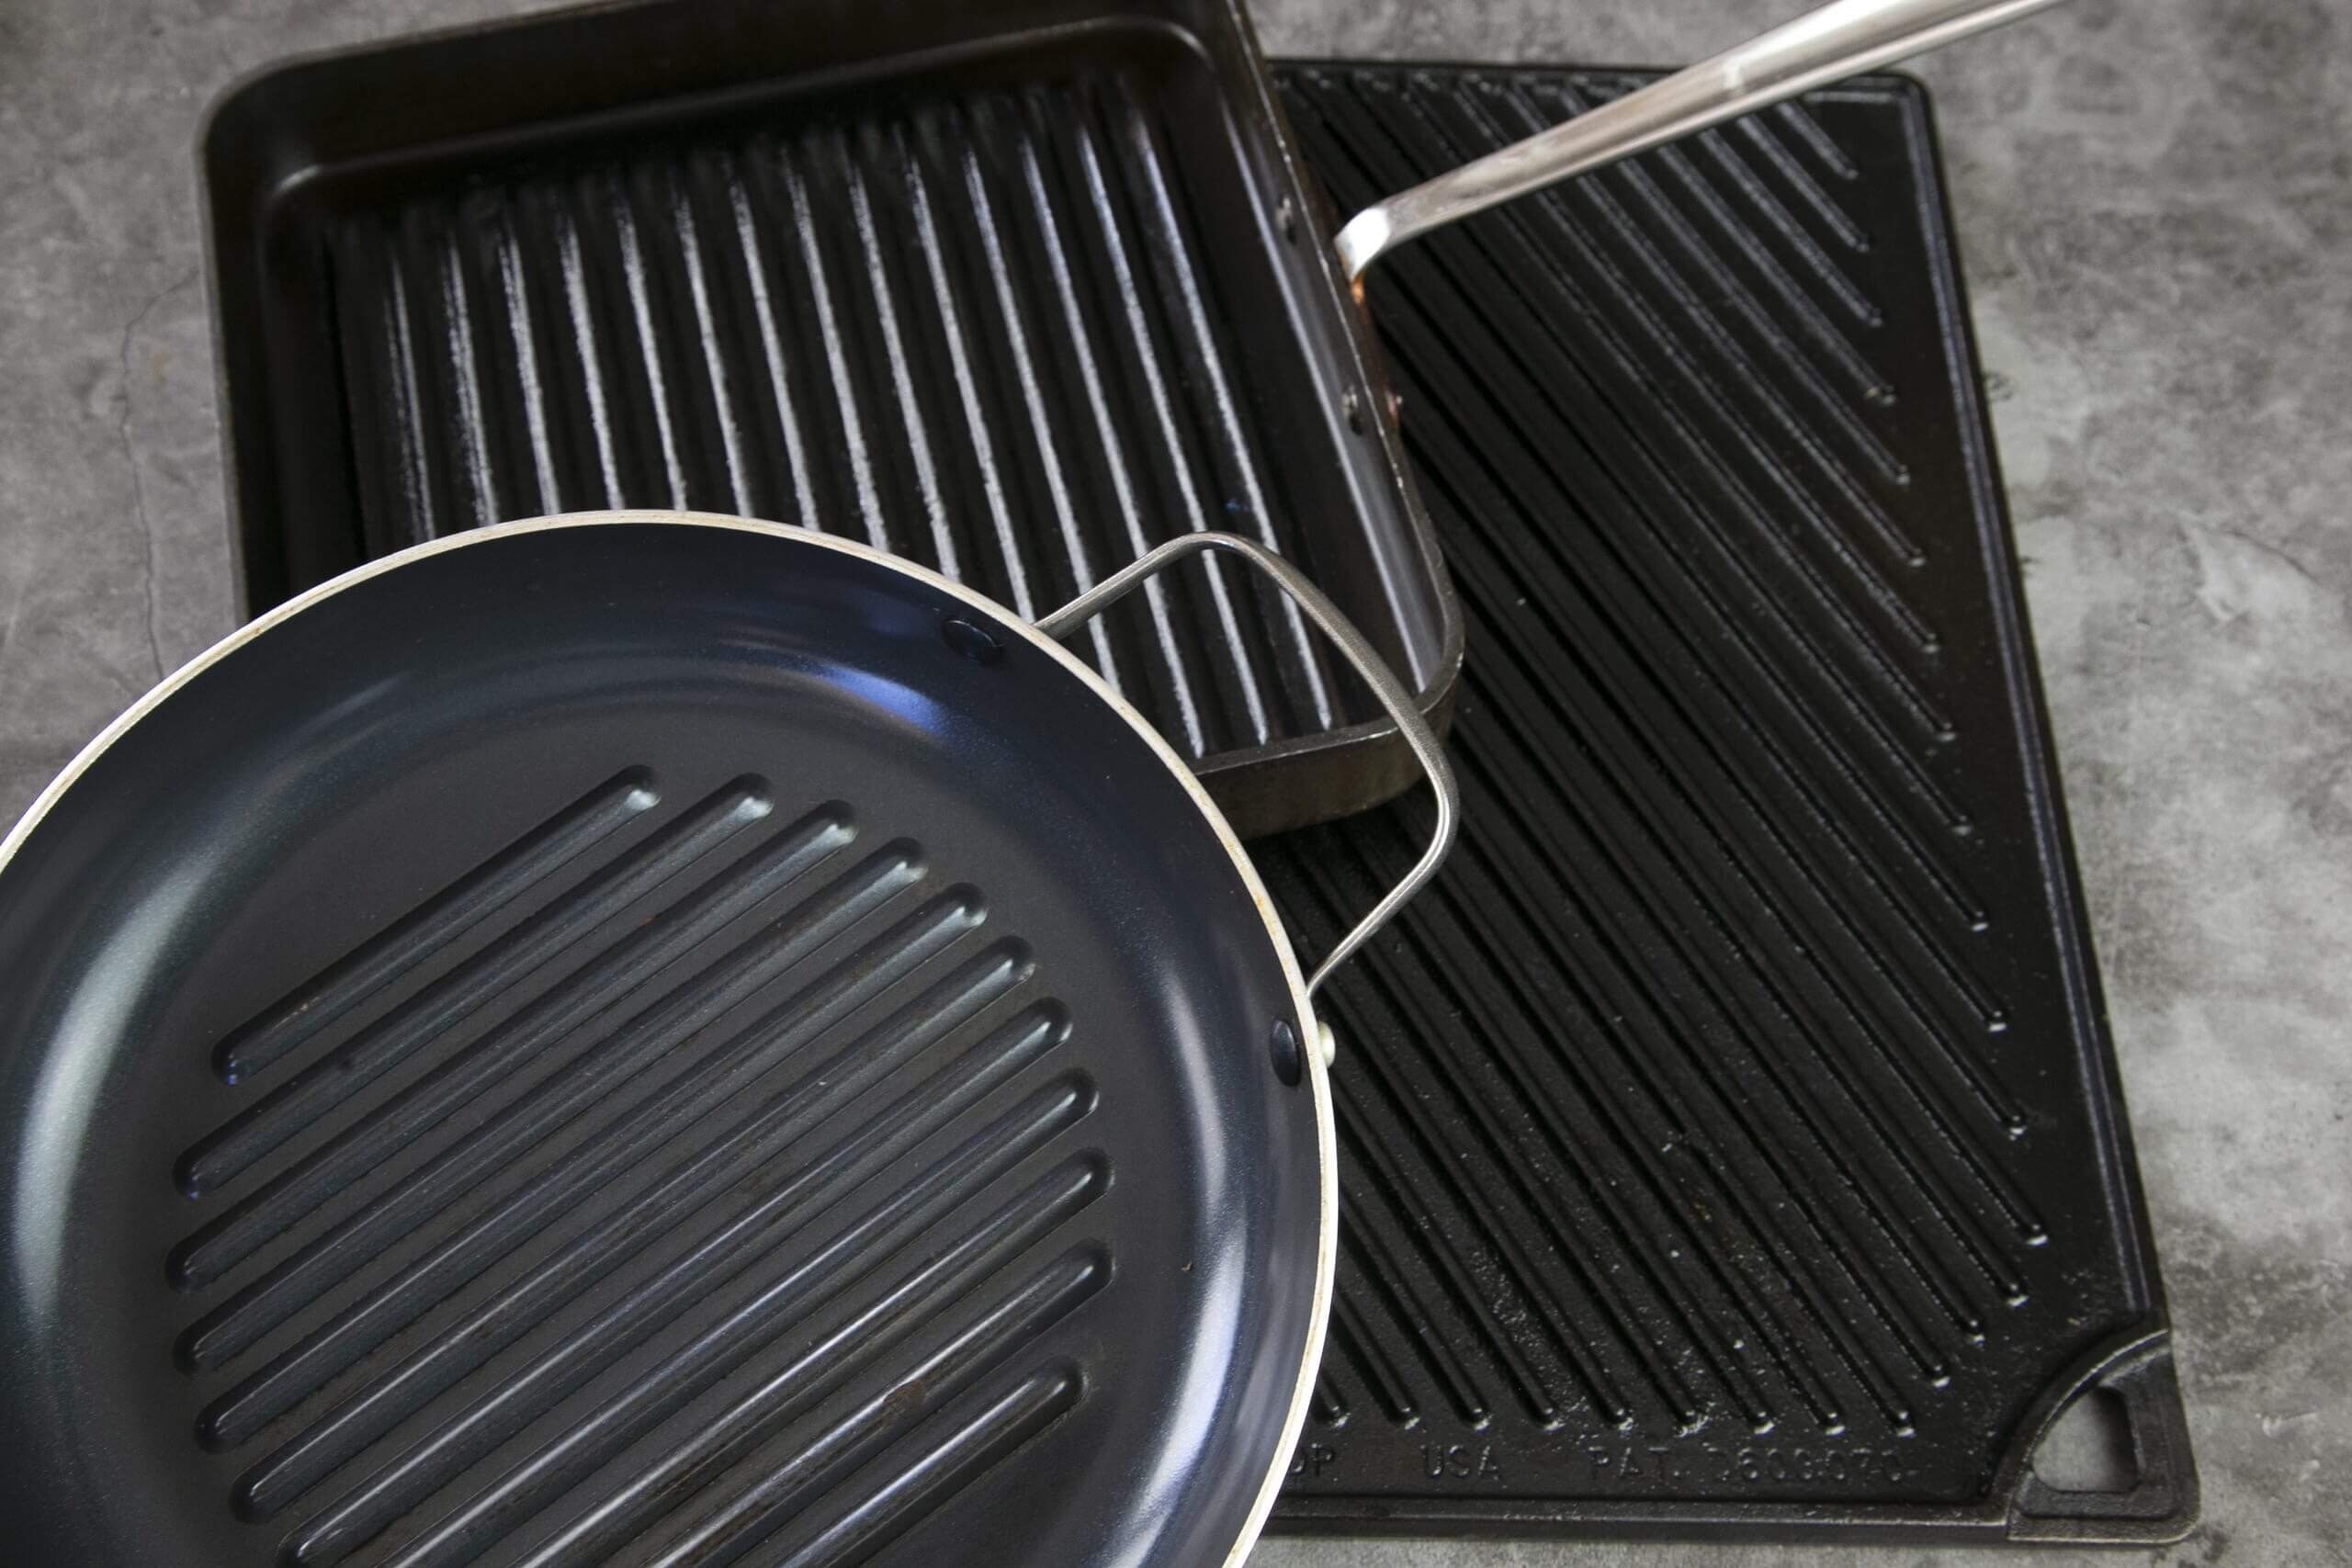 Pans that are too heavy will put a lot of pressure on the electric stove top